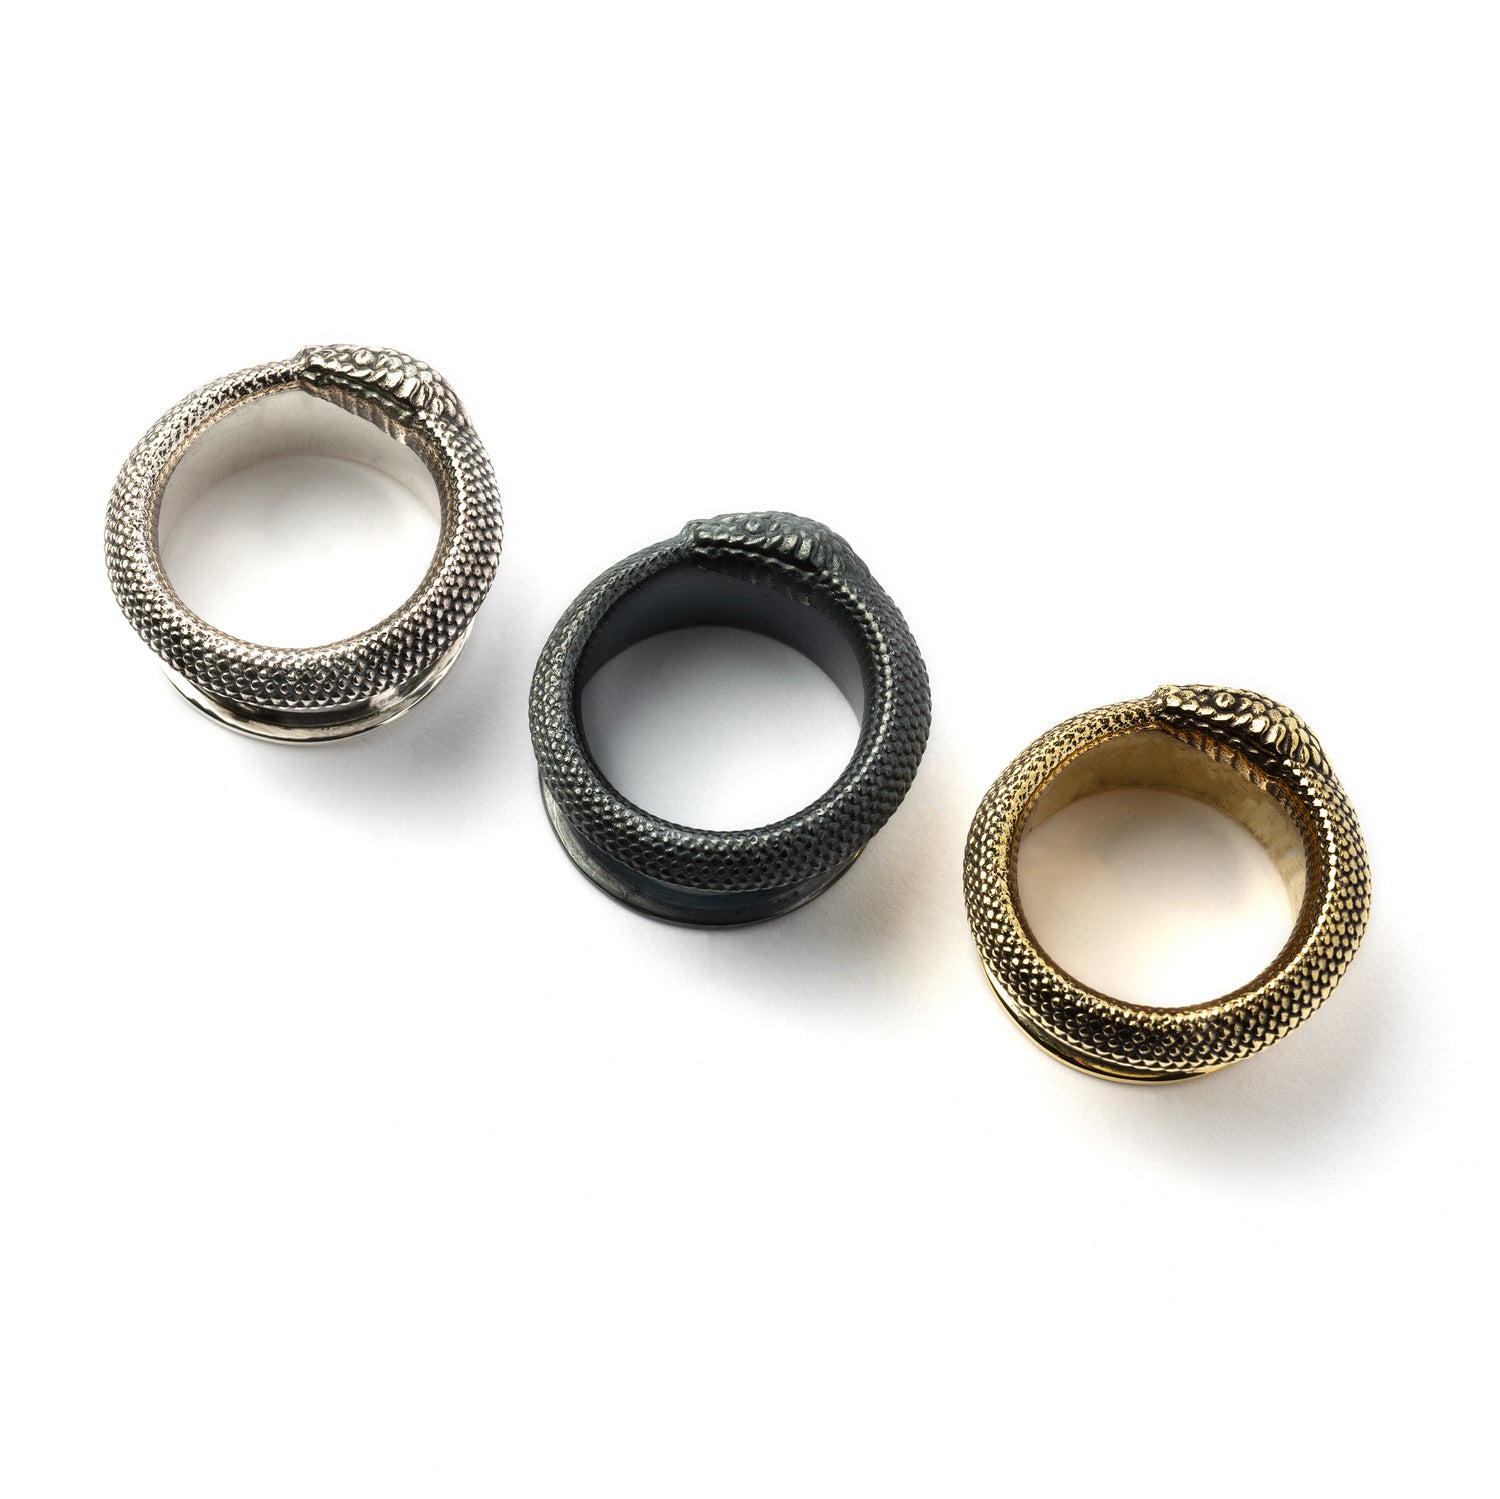 Ouroboros black silver and gold ear tunnels